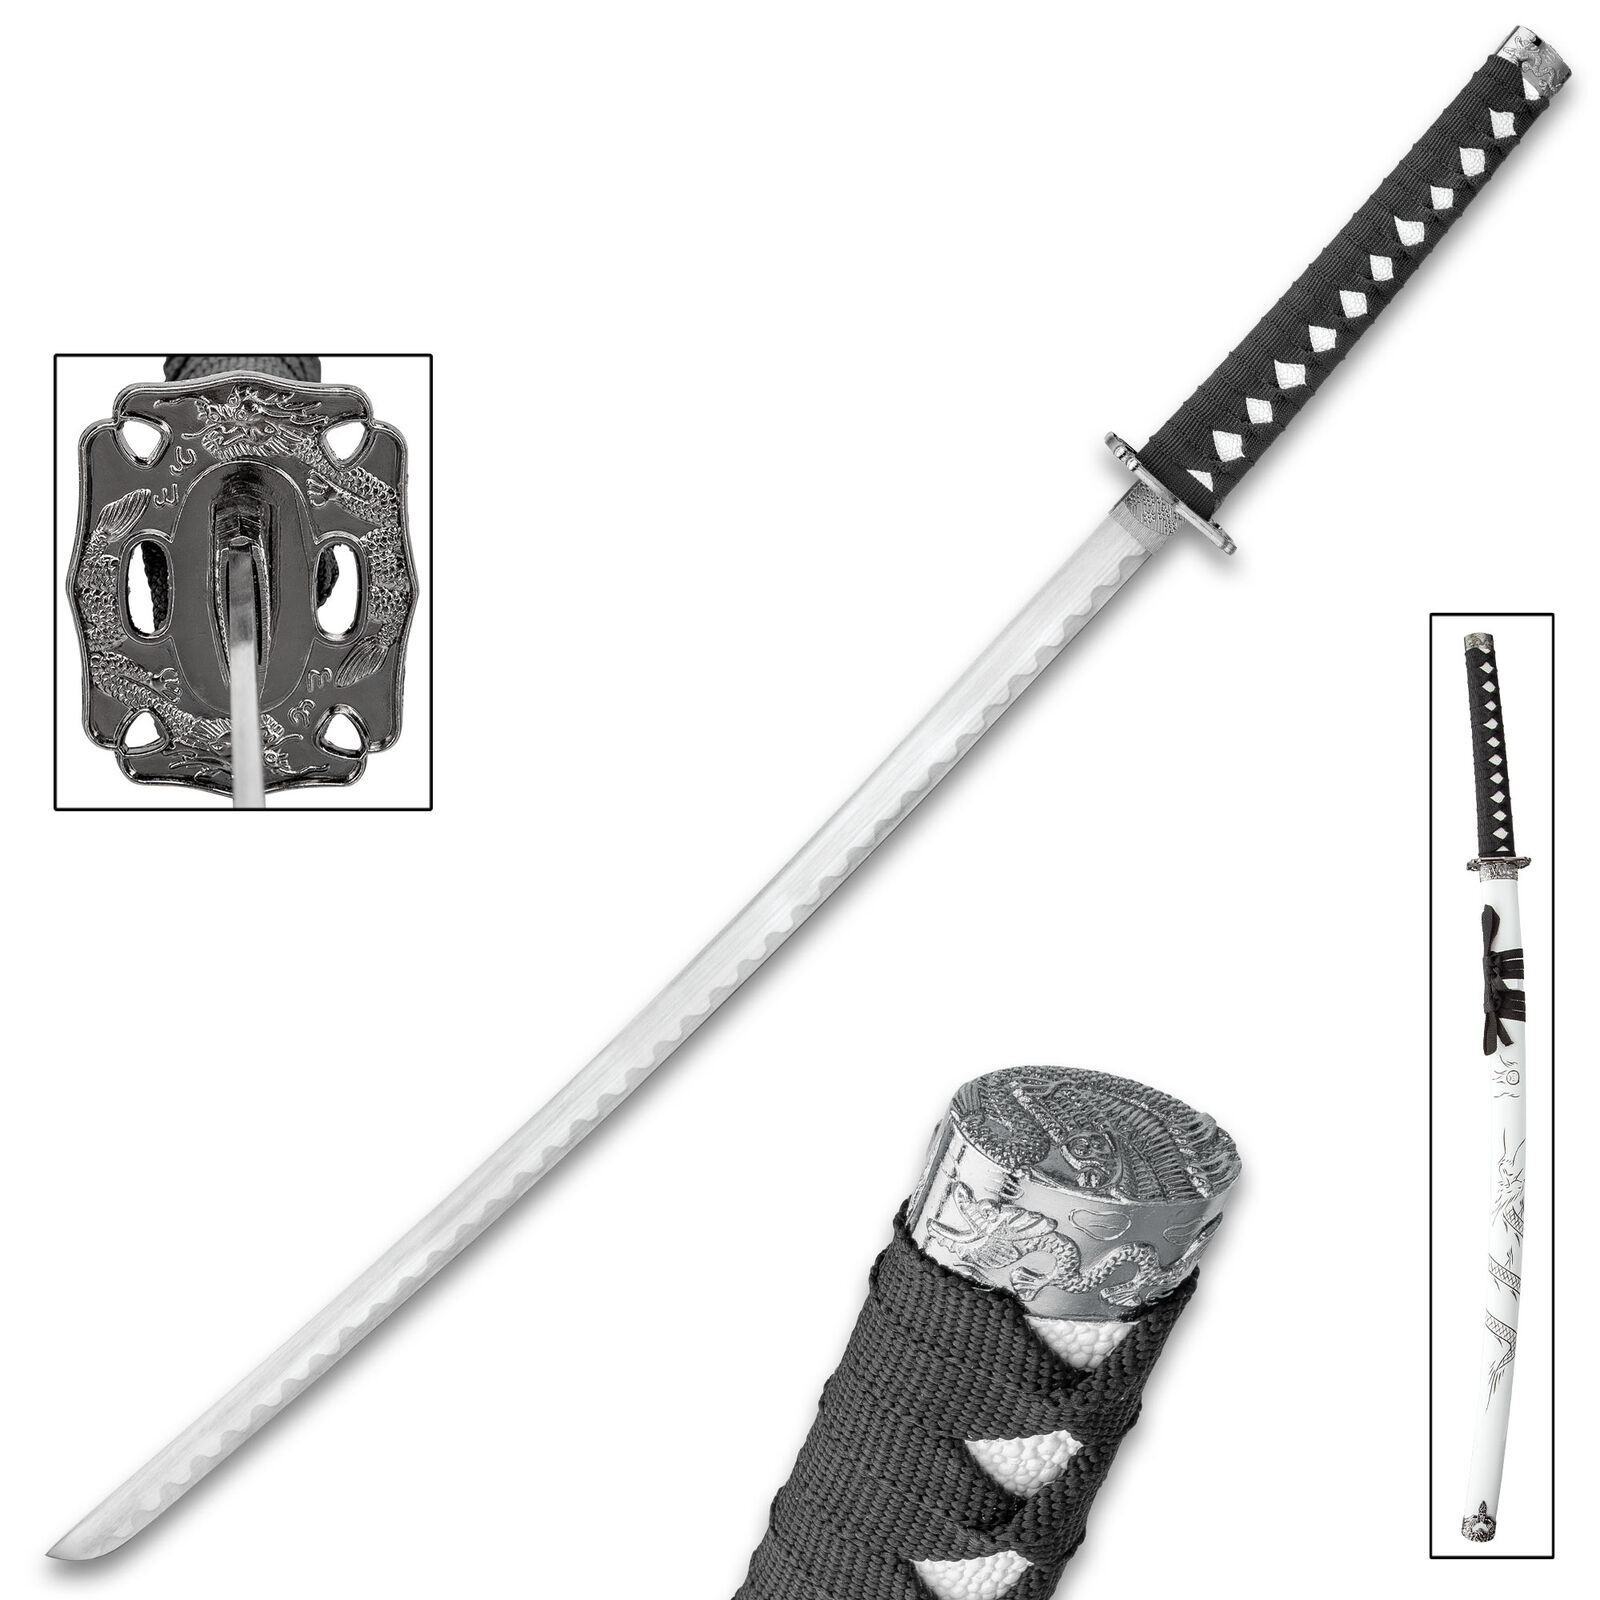 K Exclusive Cloud Dragon Katana - Stainless Steel Blade, Scabbard with Dragon